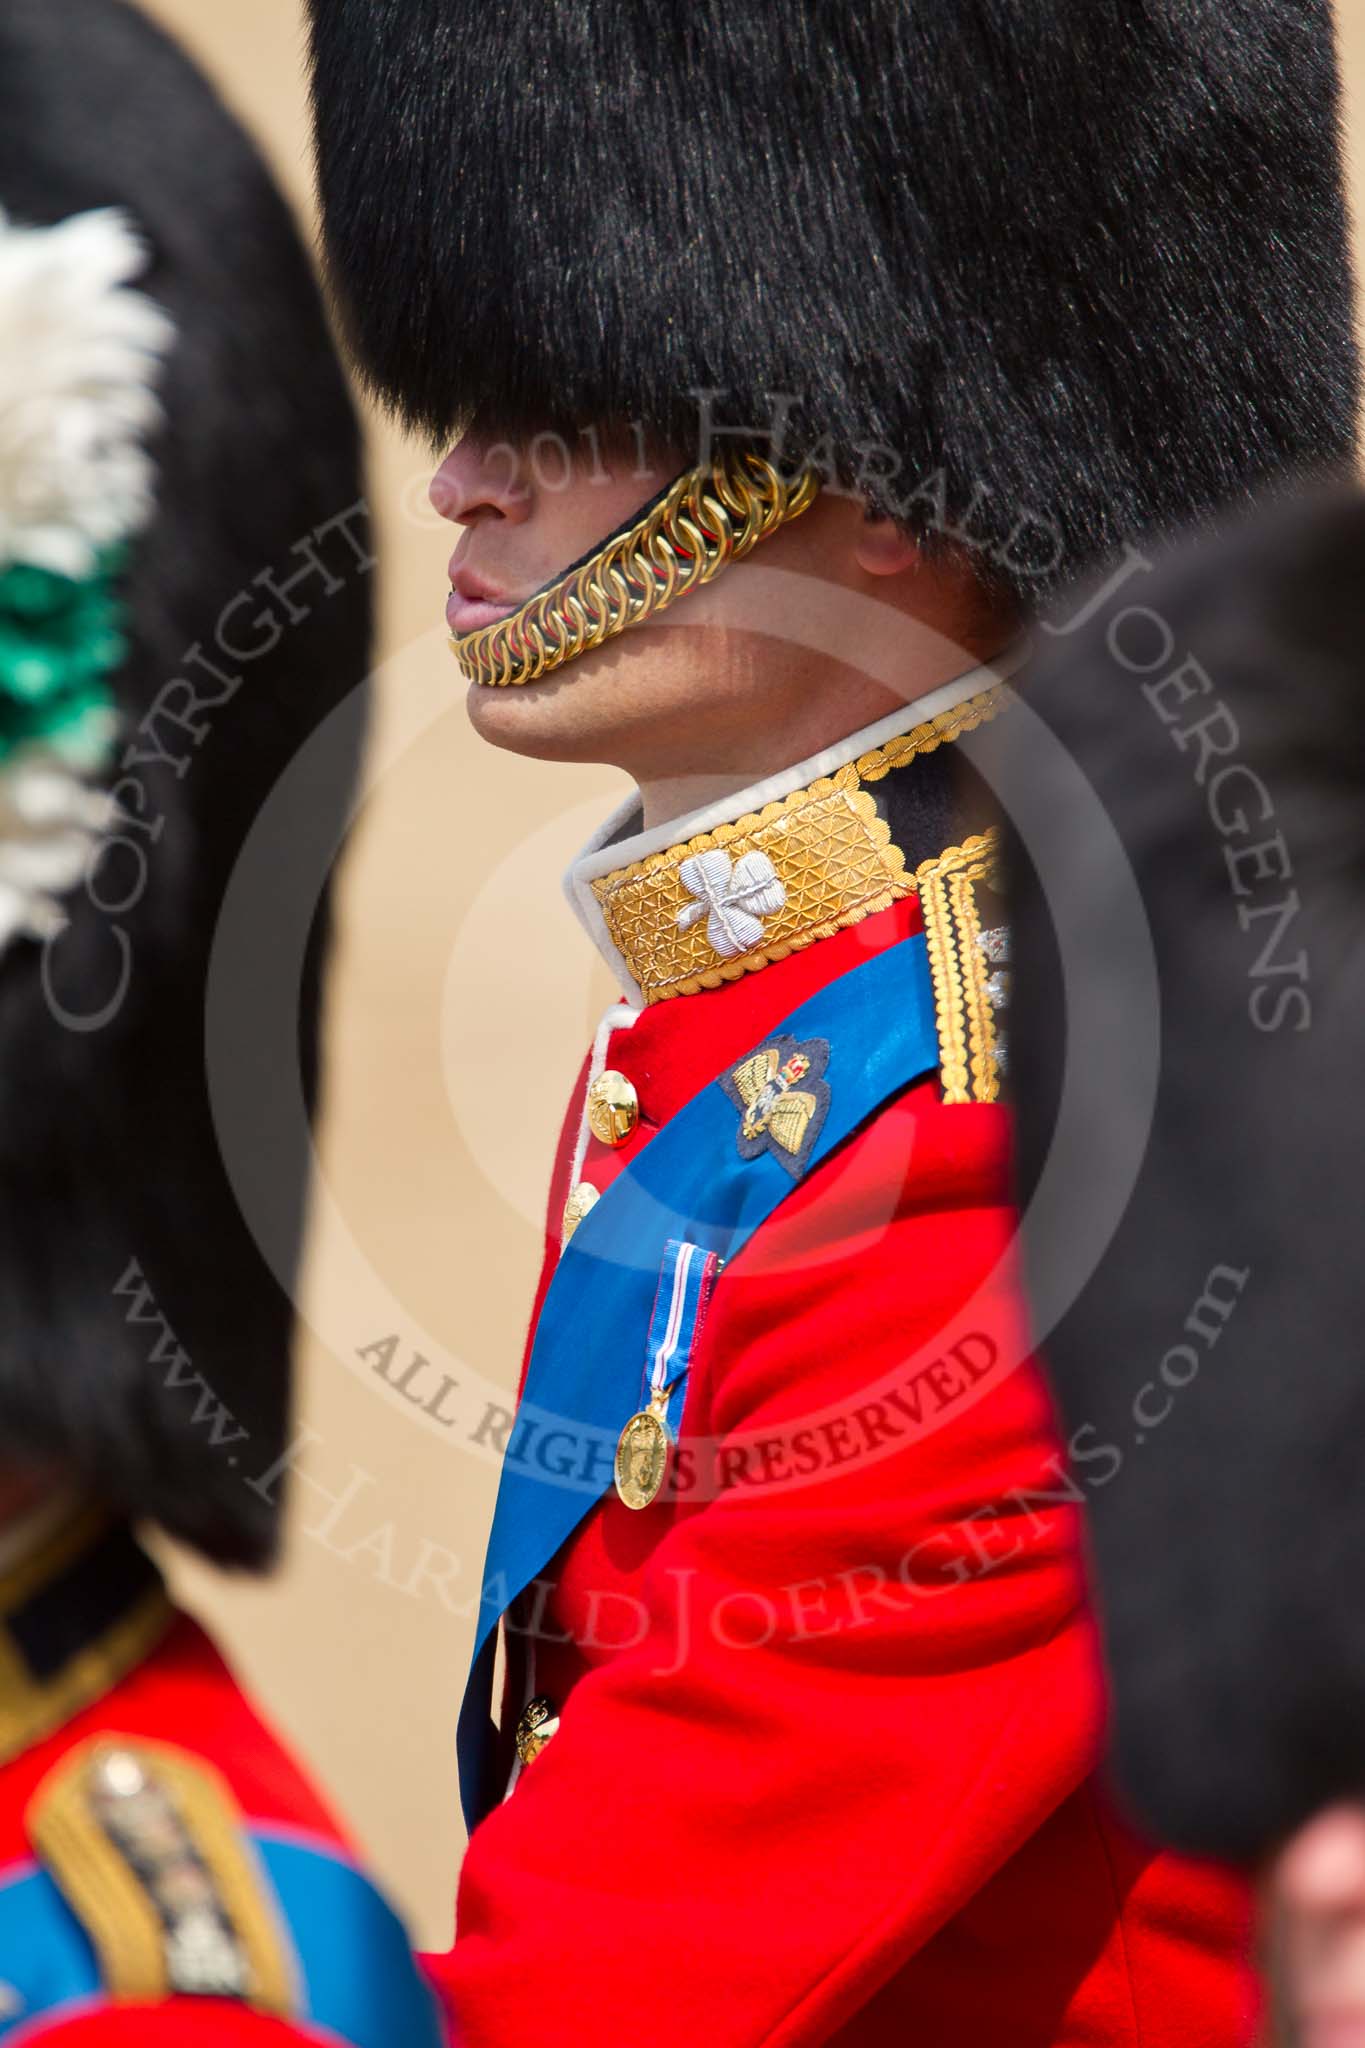 Trooping the Colour 2011: Close-up of HRH Prince William, The Duke of Cambridge, Colonel Irish Guards, at his first 'Trooping the Colour' parade..
Horse Guards Parade, Westminster,
London SW1,
Greater London,
United Kingdom,
on 11 June 2011 at 11:02, image #147